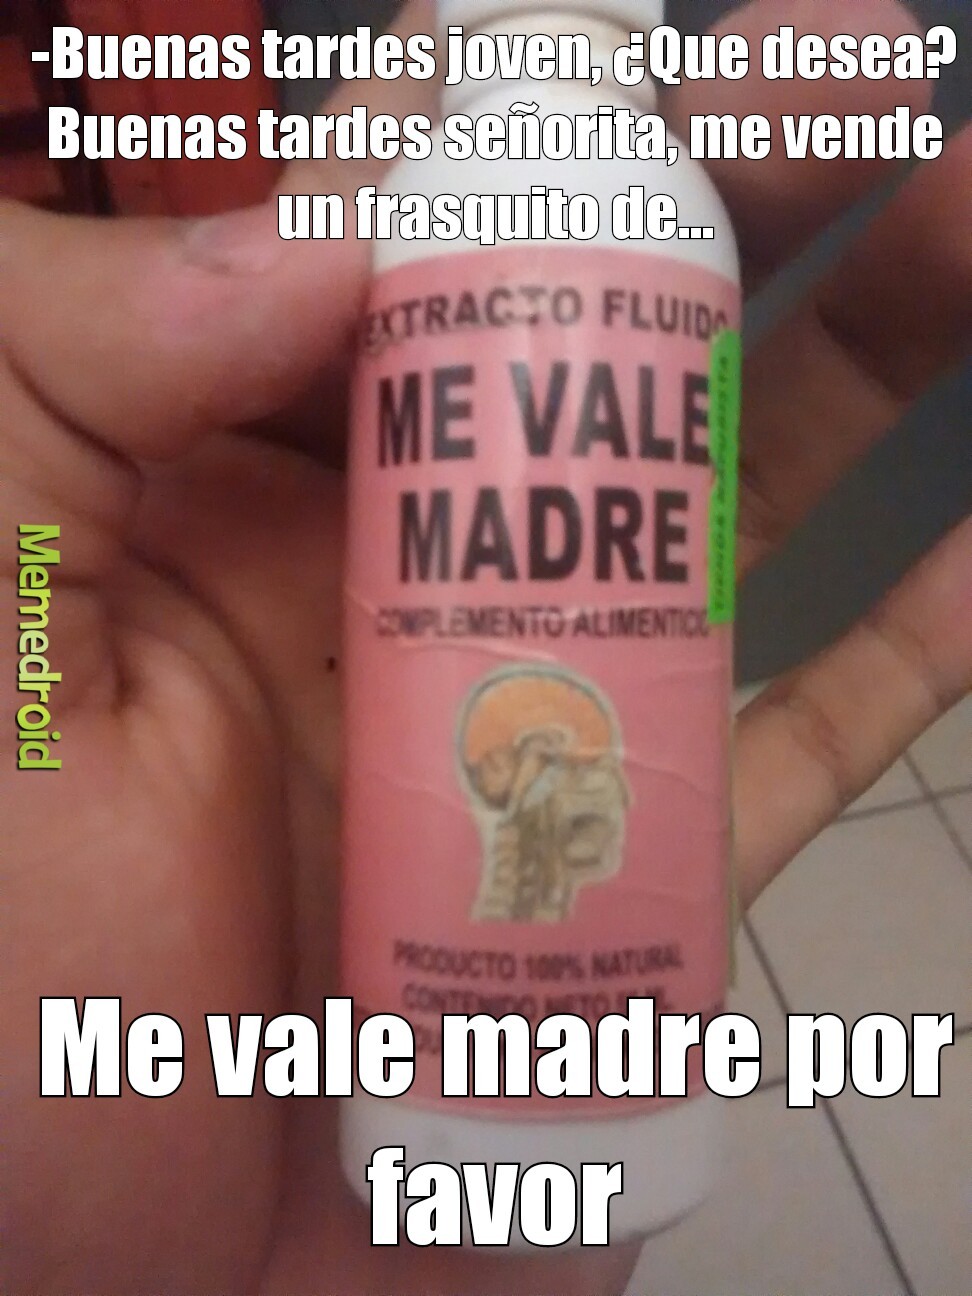 Me vale madres doctor - meme